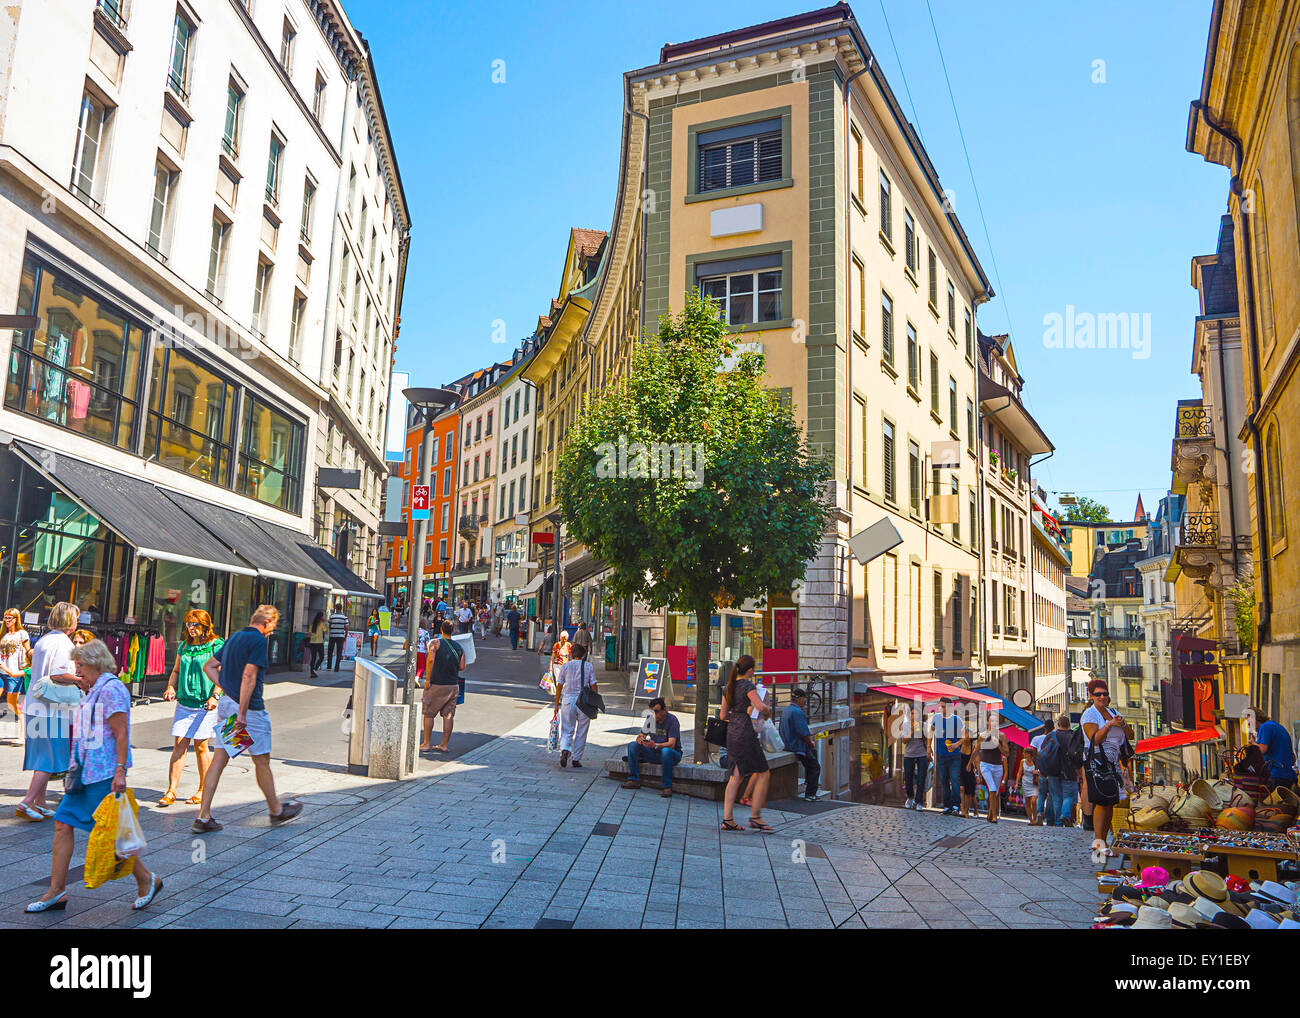 LAUSANNE, SWITZERLAND - AUGUST 23, 2013: View of Lausanne street in summer Stock Photo